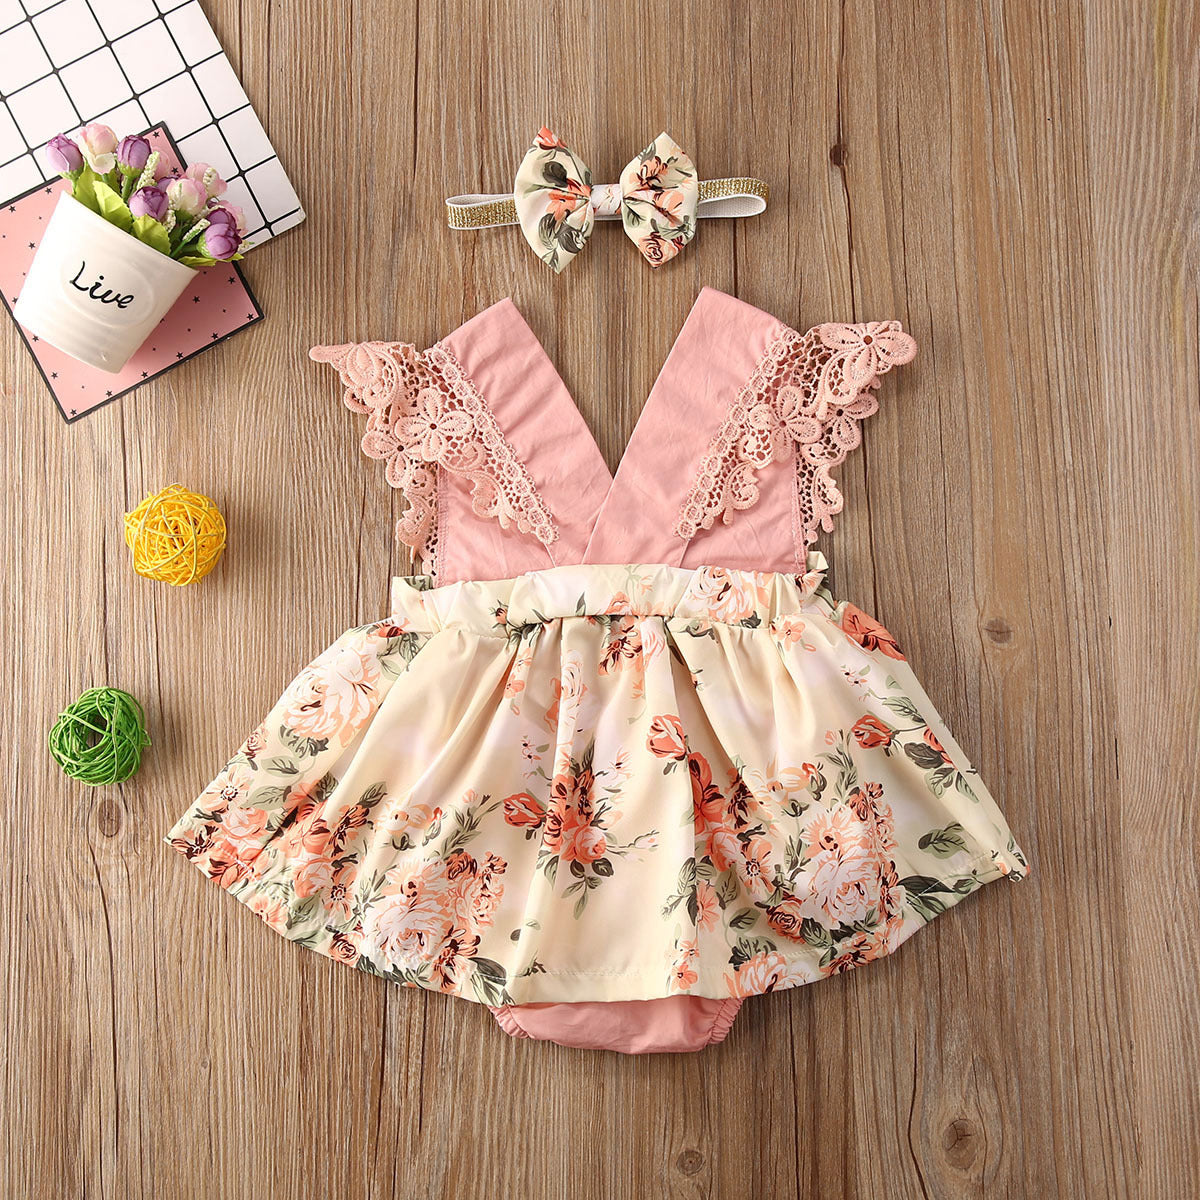 Girl Princess Clothes Baby Romper Girls Floral Lace V Neck Sleeveless  Jumpsuit Newborn Headband Kid Outfits Summer Clothing